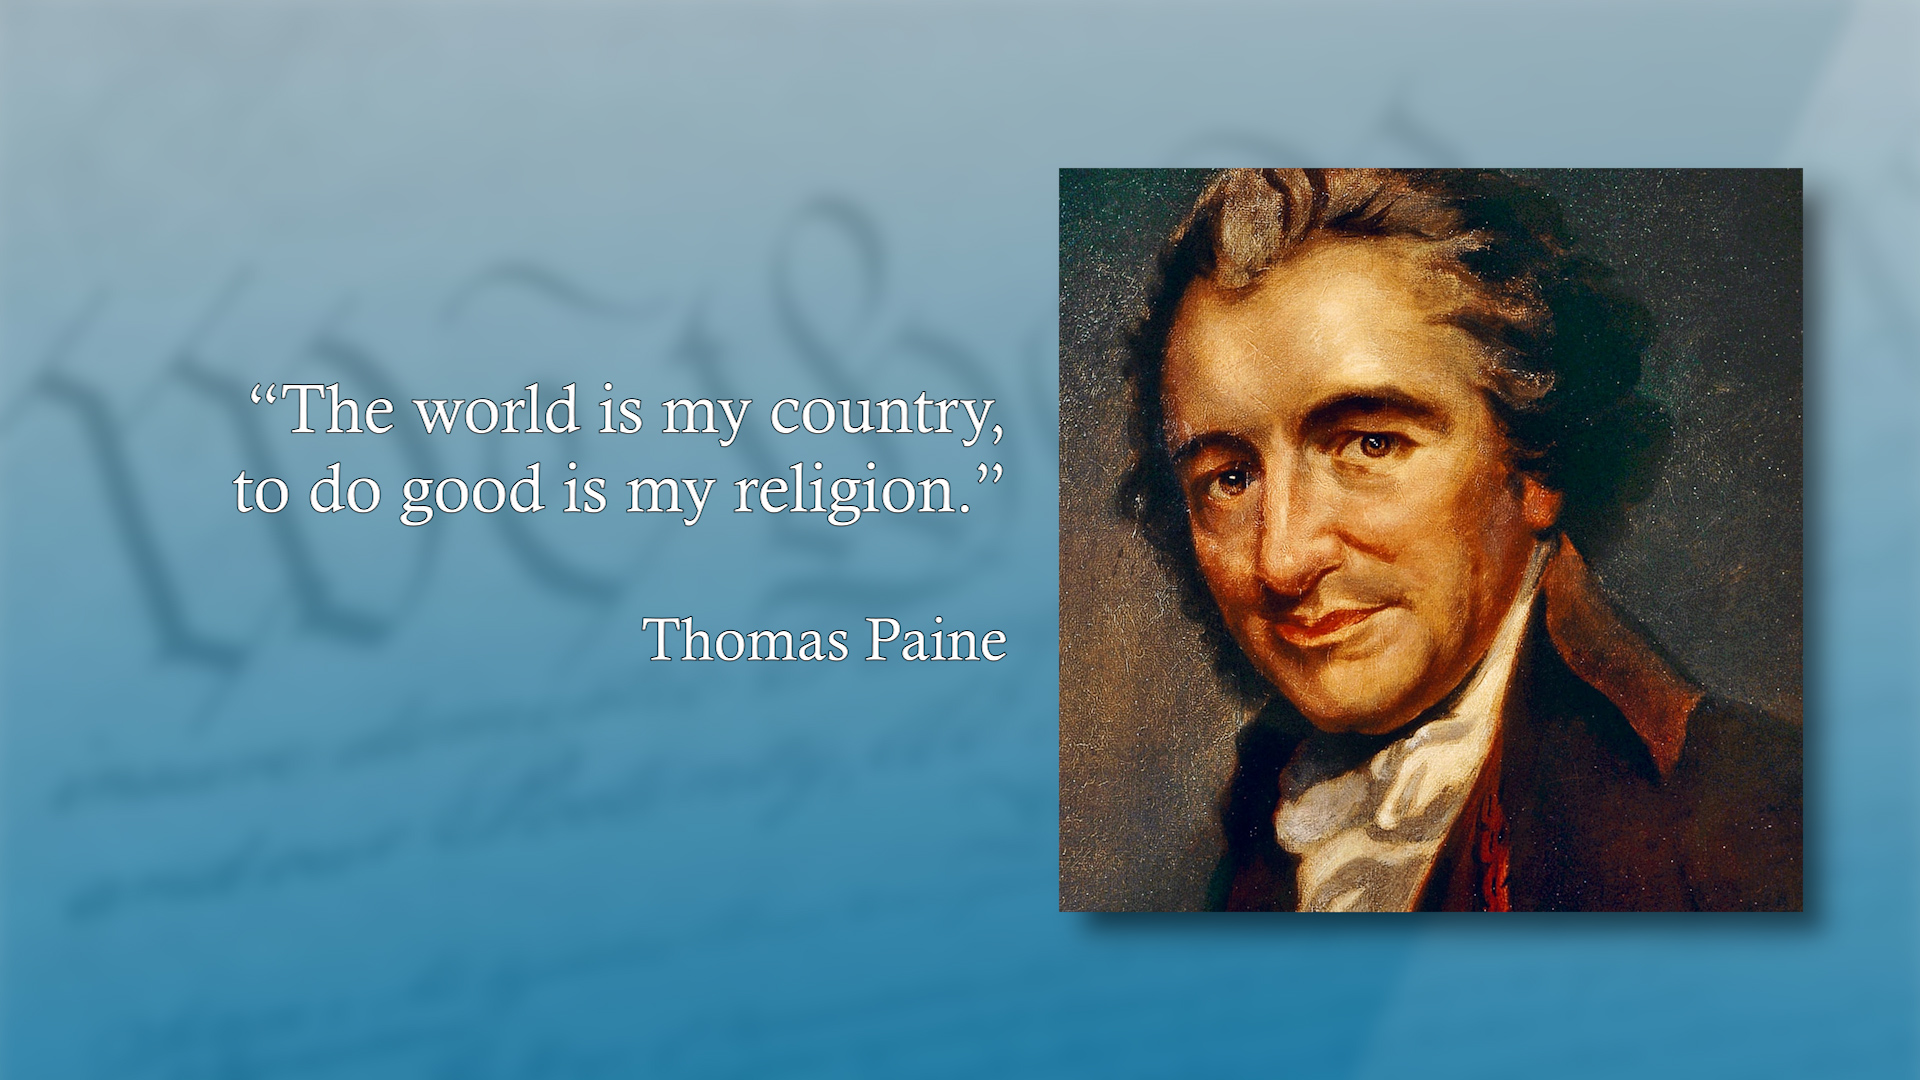 screenshot from Freethought Matters featuring a painting of Tomas Paine with the quote "The world is my country, to do good is my religion."